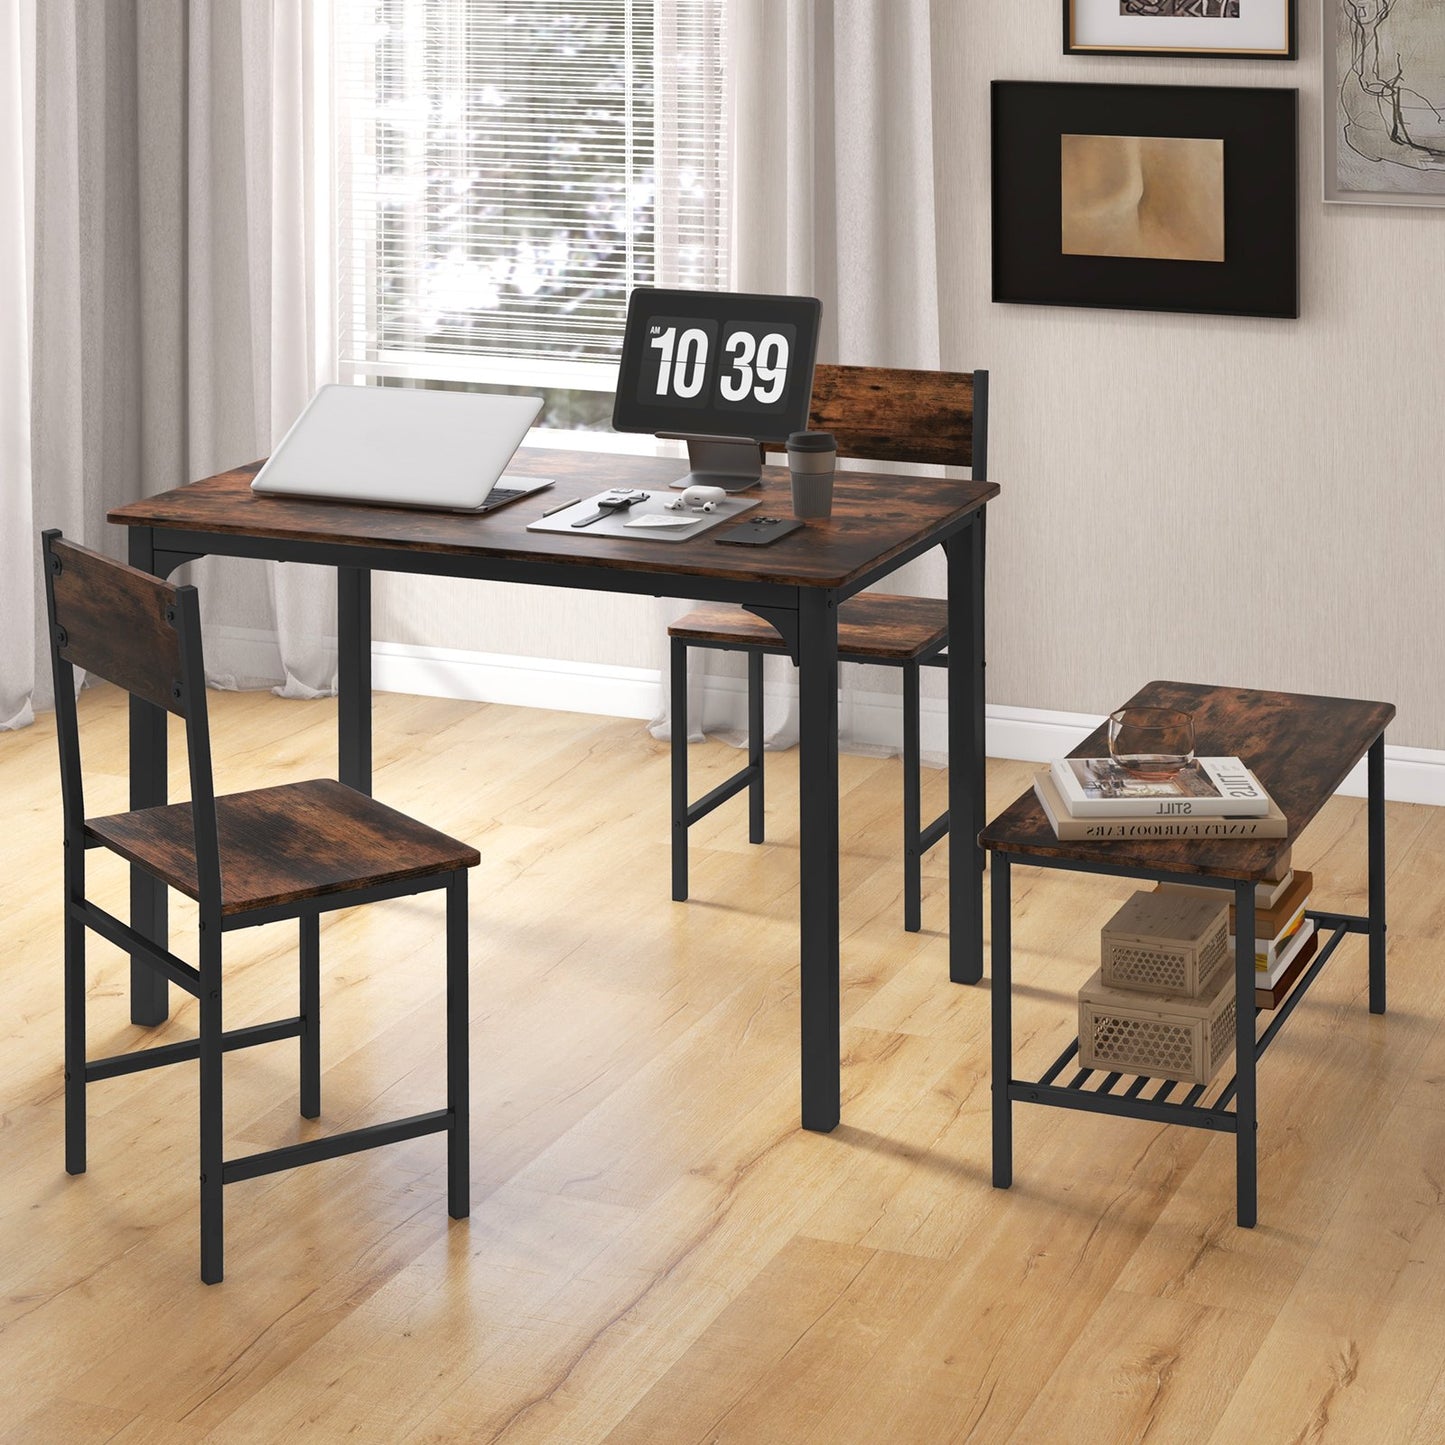 4 Pieces Rustic Dining Table Set with 2 Chairs and Bench, Rustic Brown